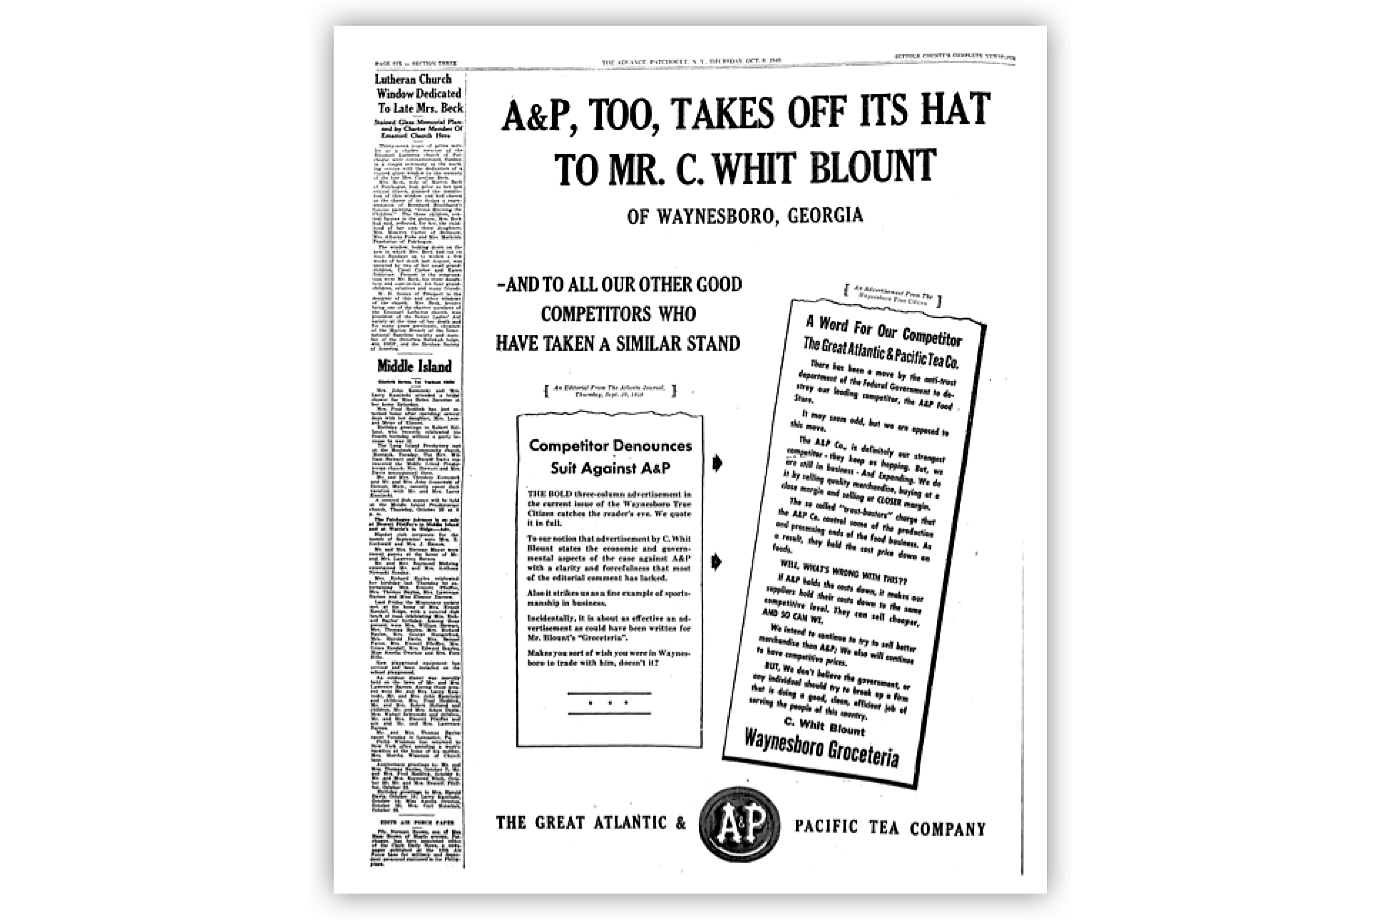 "A&P Too, Takes Off Its Hat to Mr. C. Whit Blount" Newspaper Ad